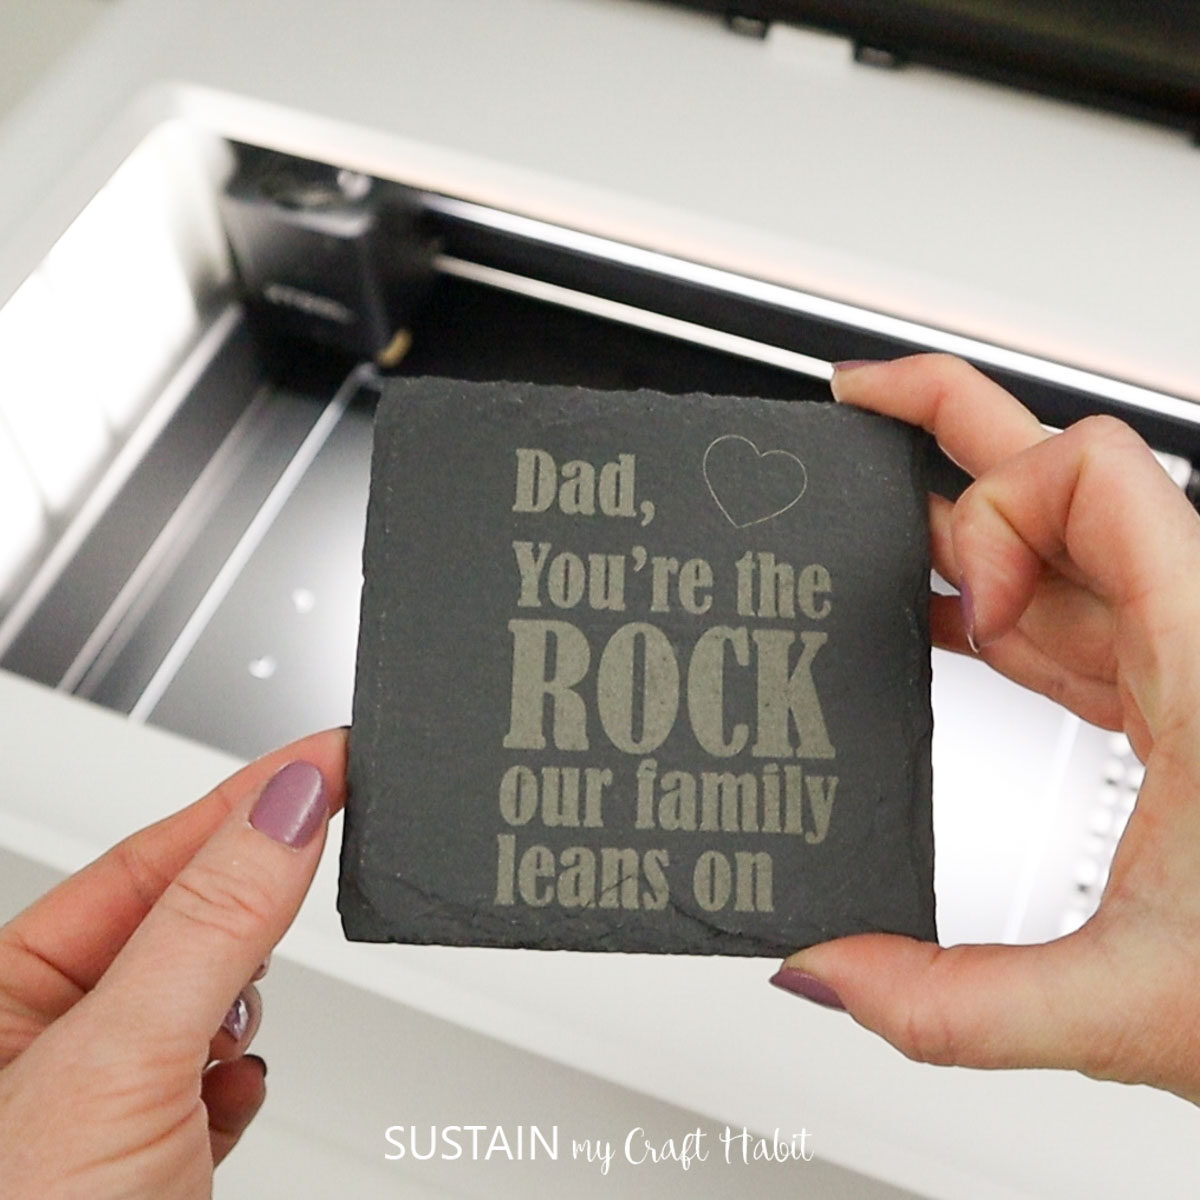 Hand holding an engraved slate coaster Father's Day gift idea.